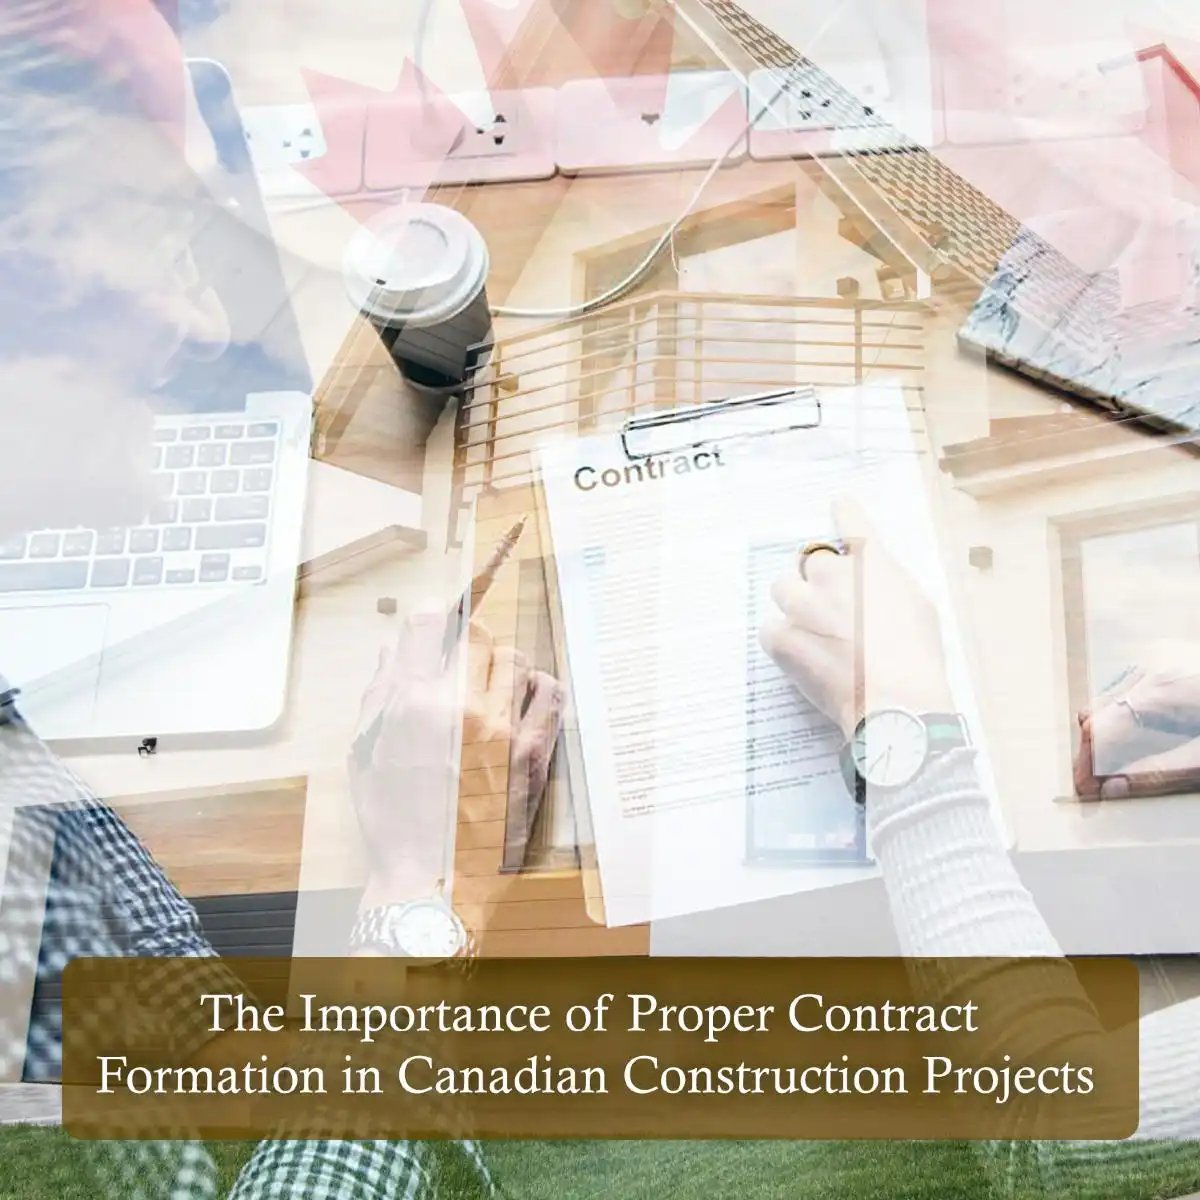 The Importance of Proper Contract Formation in Canadian Construction Projects